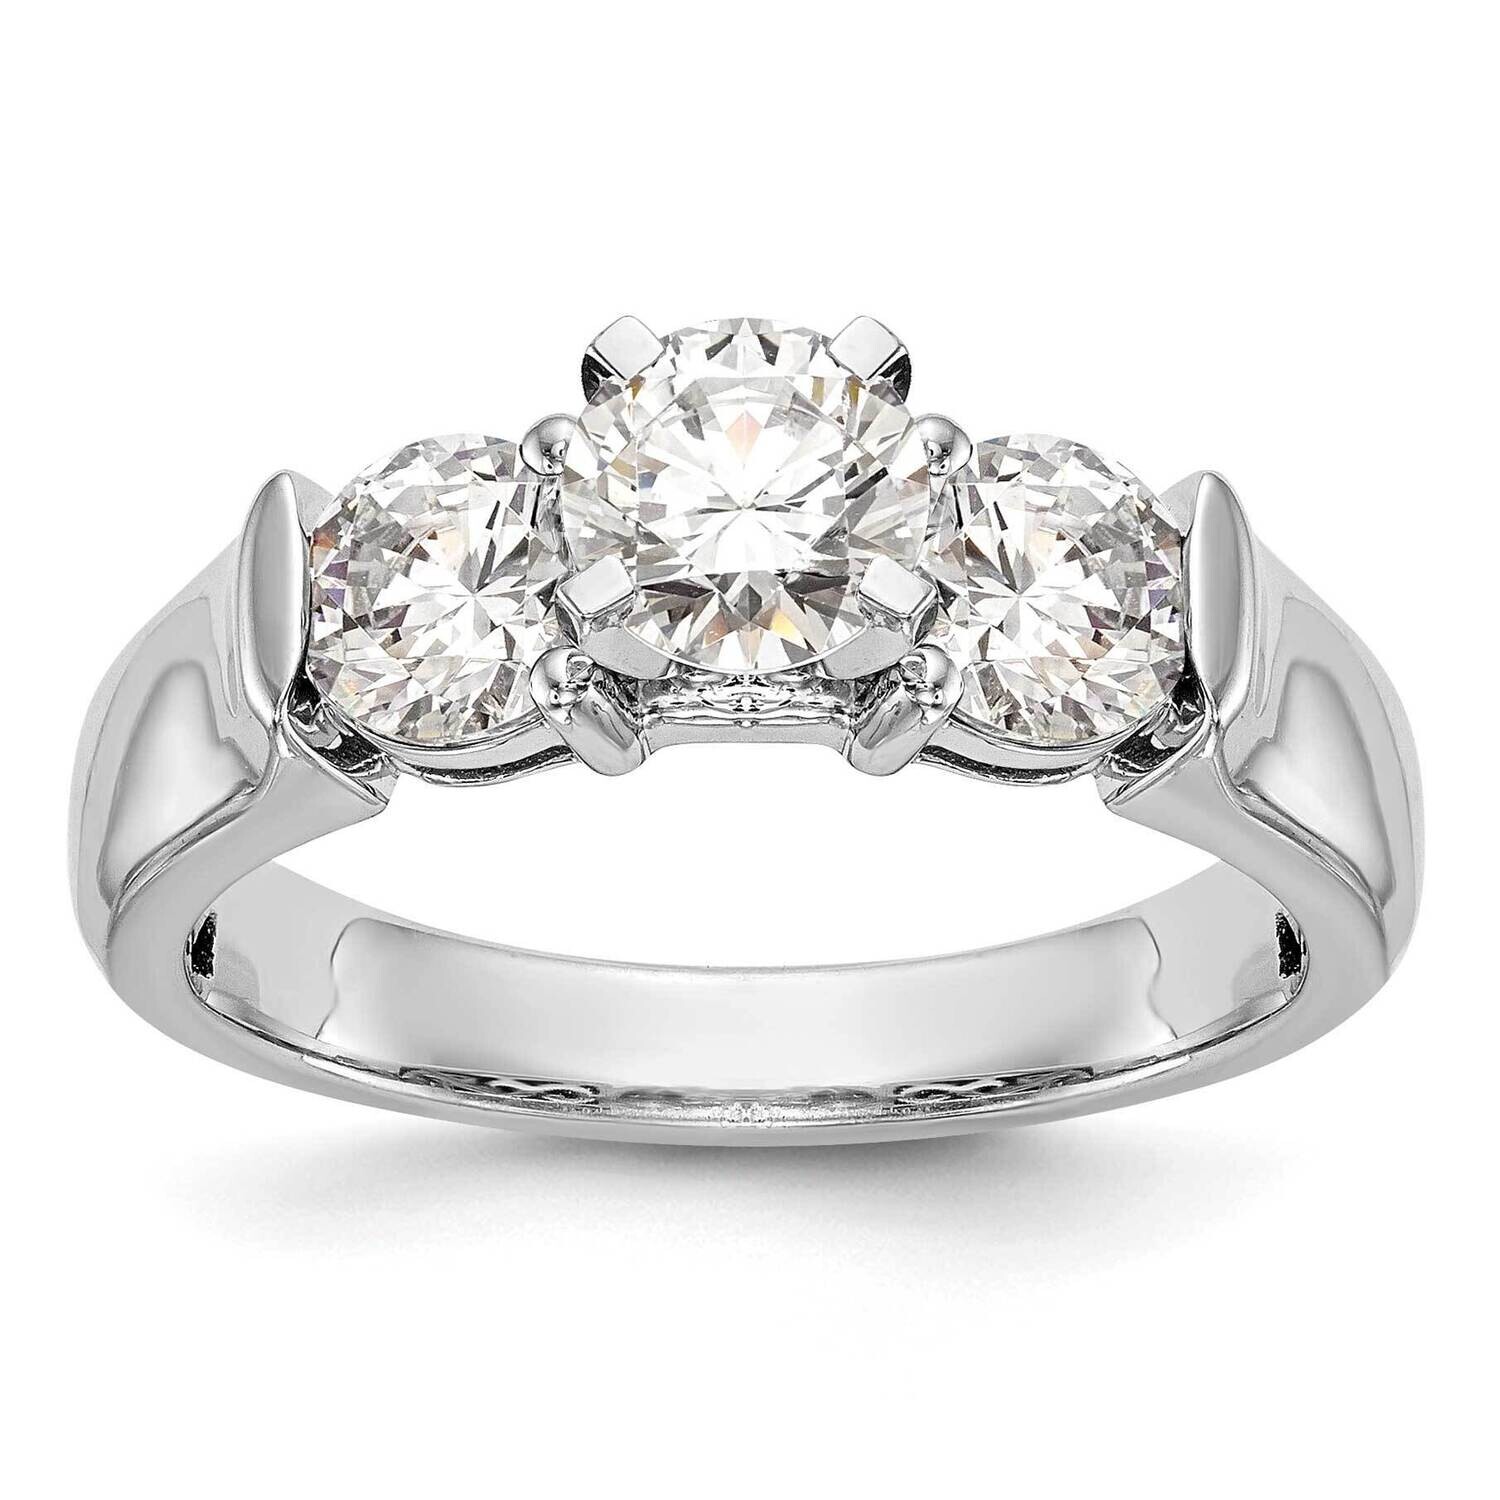 3-Stone Holds 1 Carat 6.5mm Round Center 2-5.2mm Round Sides Engagement Ring Mounting 14k White Gold RM2961E-100_100-CWAA